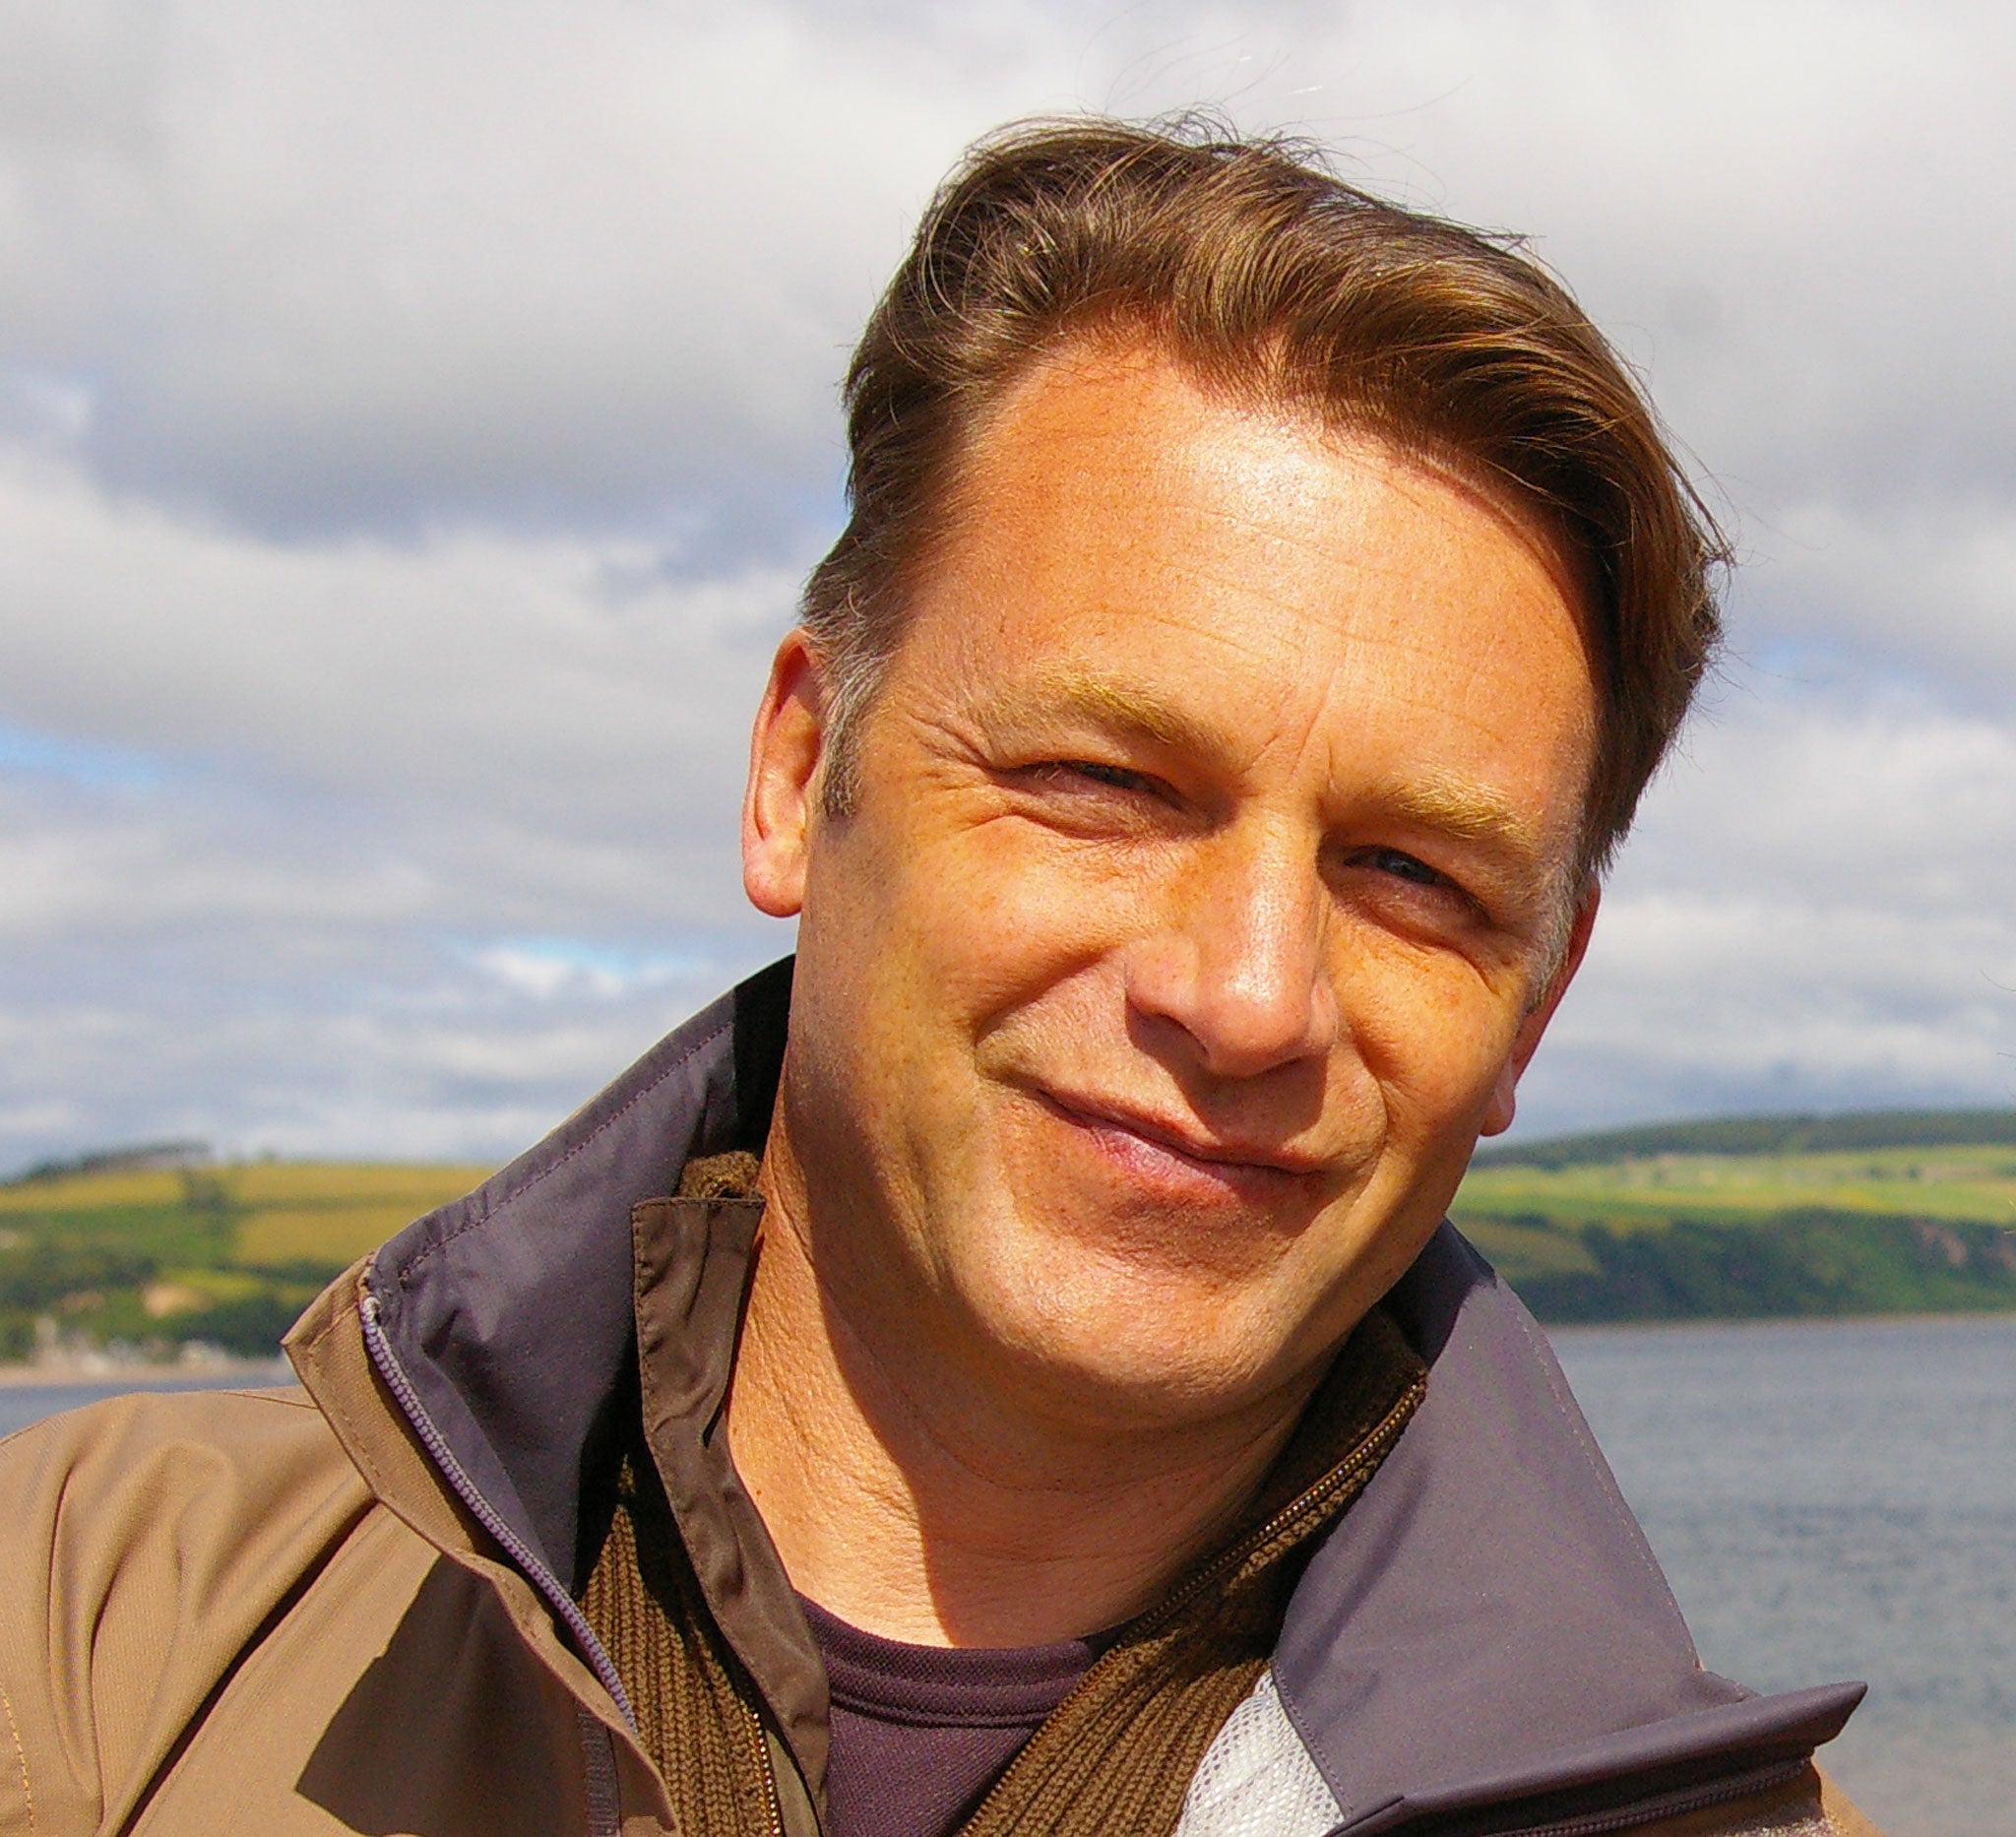 Chris Packham was on the island filming for his series about the slaughter of migrant birds